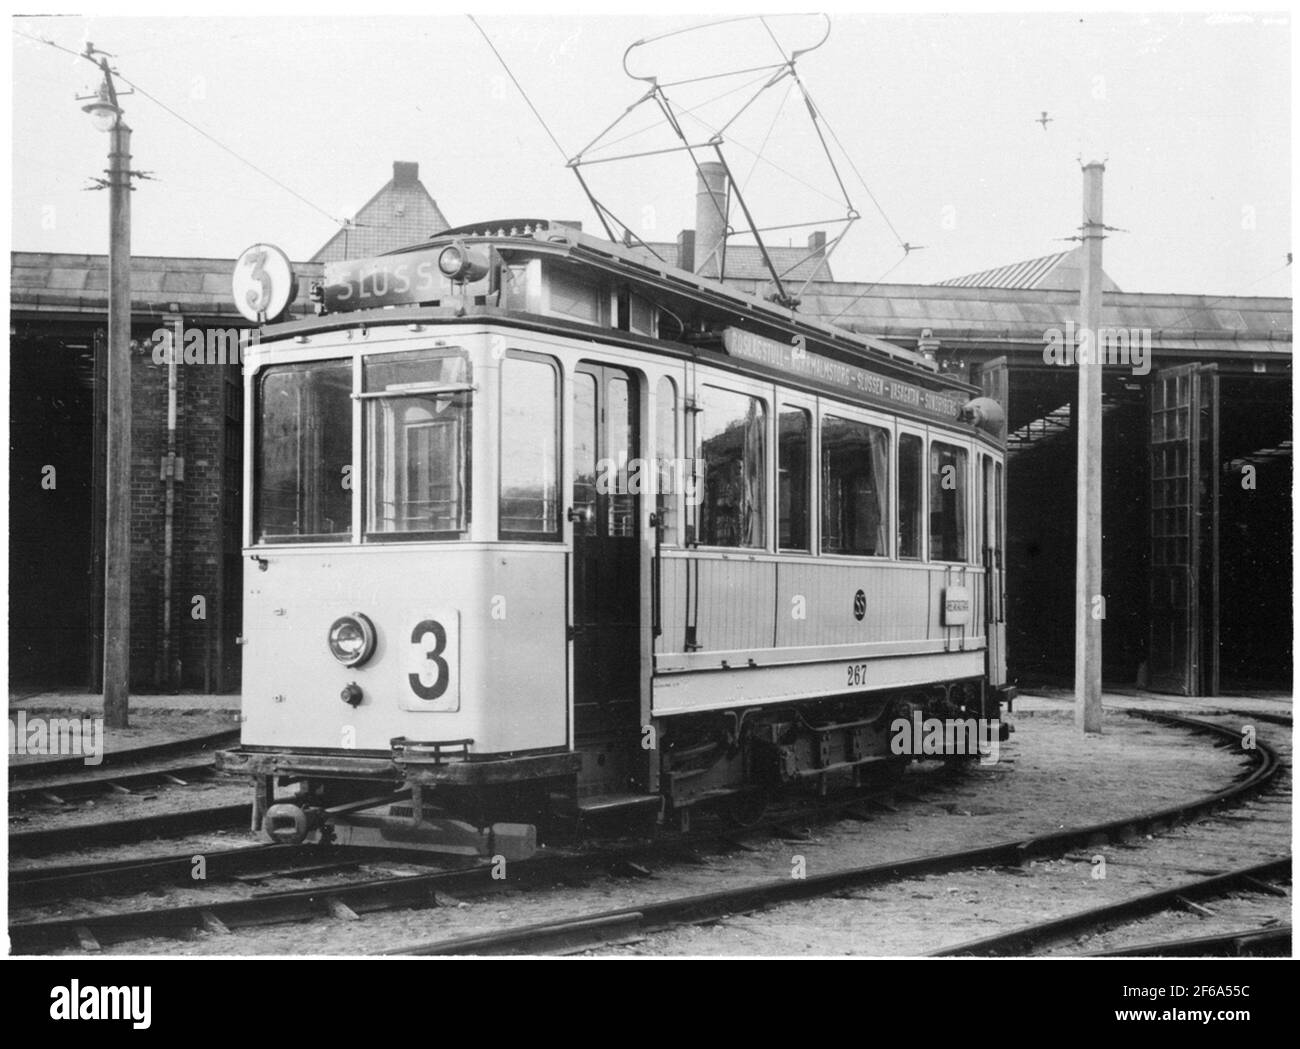 The limited company Stockholm tramway, SS A10 267 outside the trolley hall in Råsunda 1920. The busy line 3 between Roslagstull and Sundbyberg. On the side plate, the text is the worker rate. Stock Photo